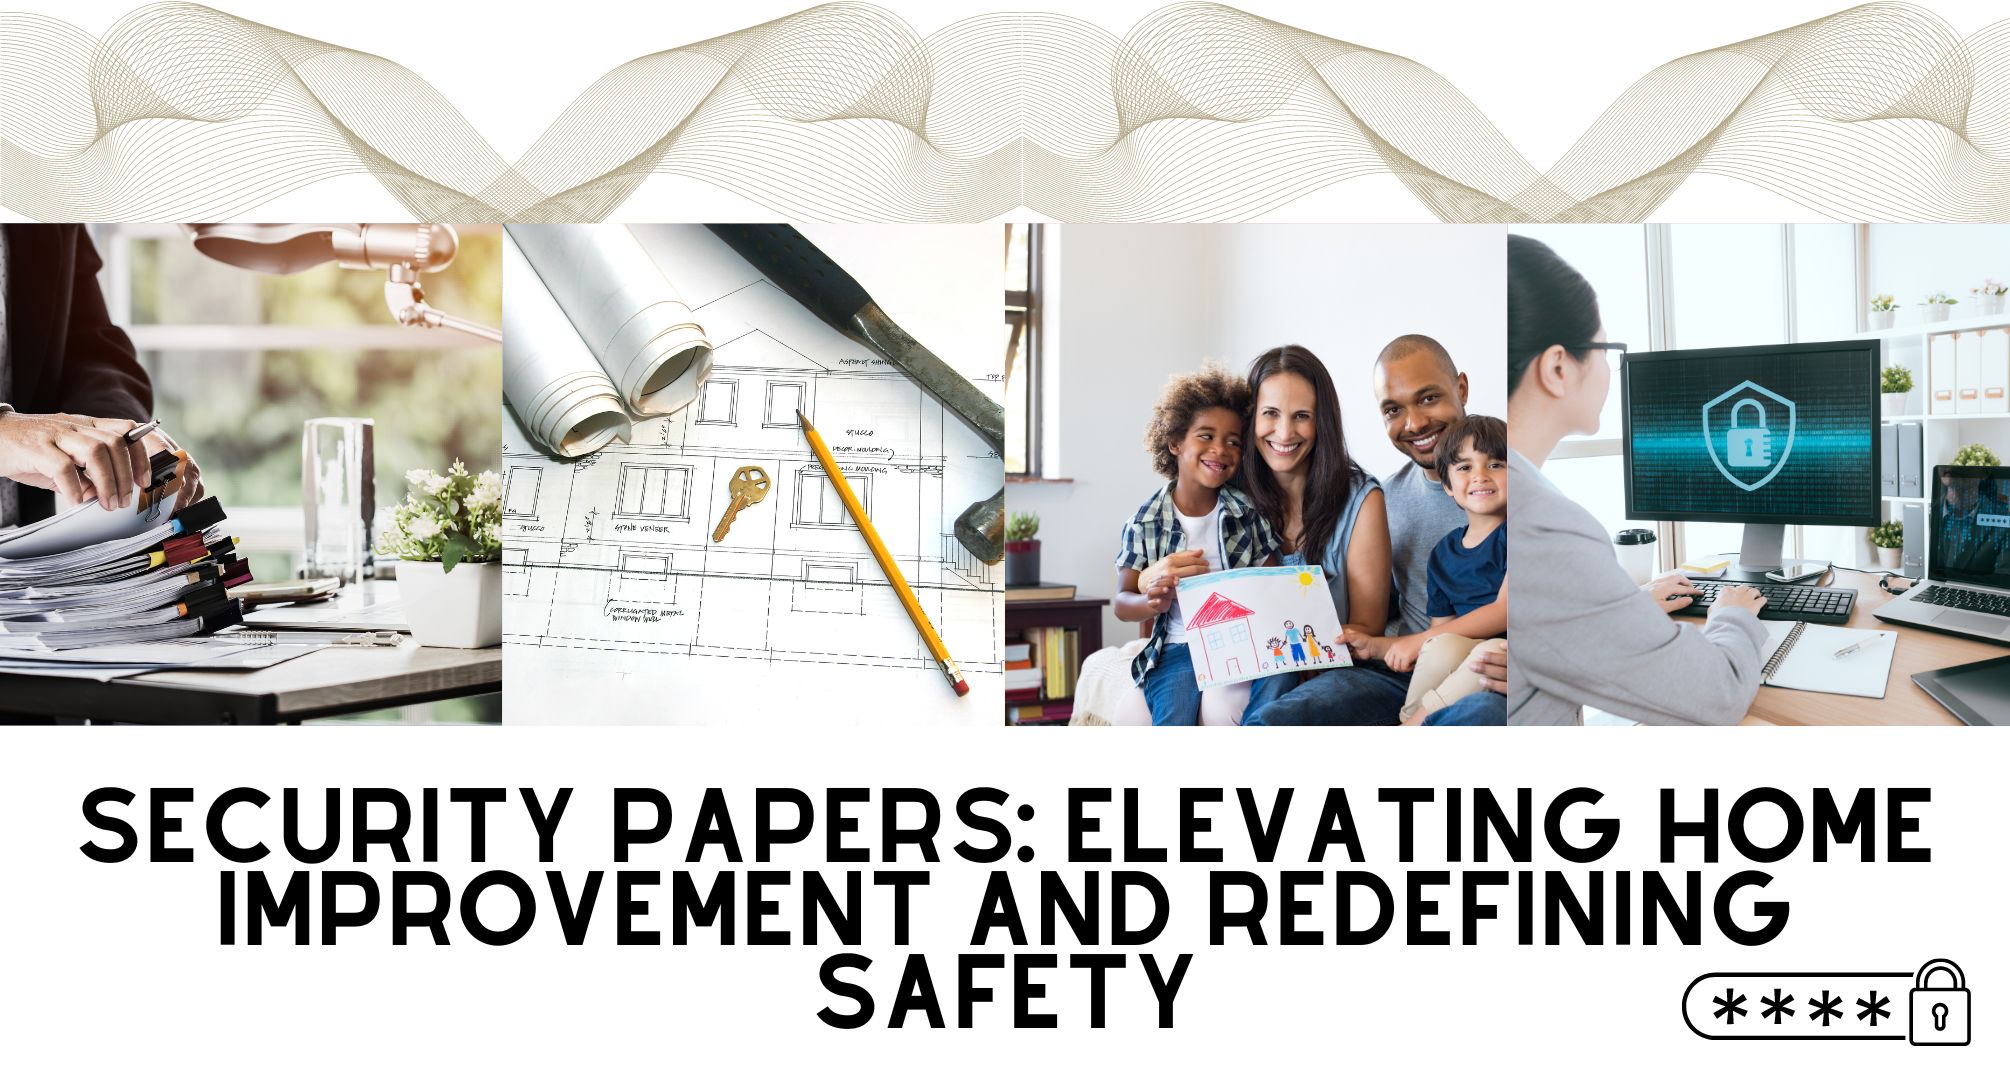 Security Papers: Elevating Home Improvement and Redefining Safety